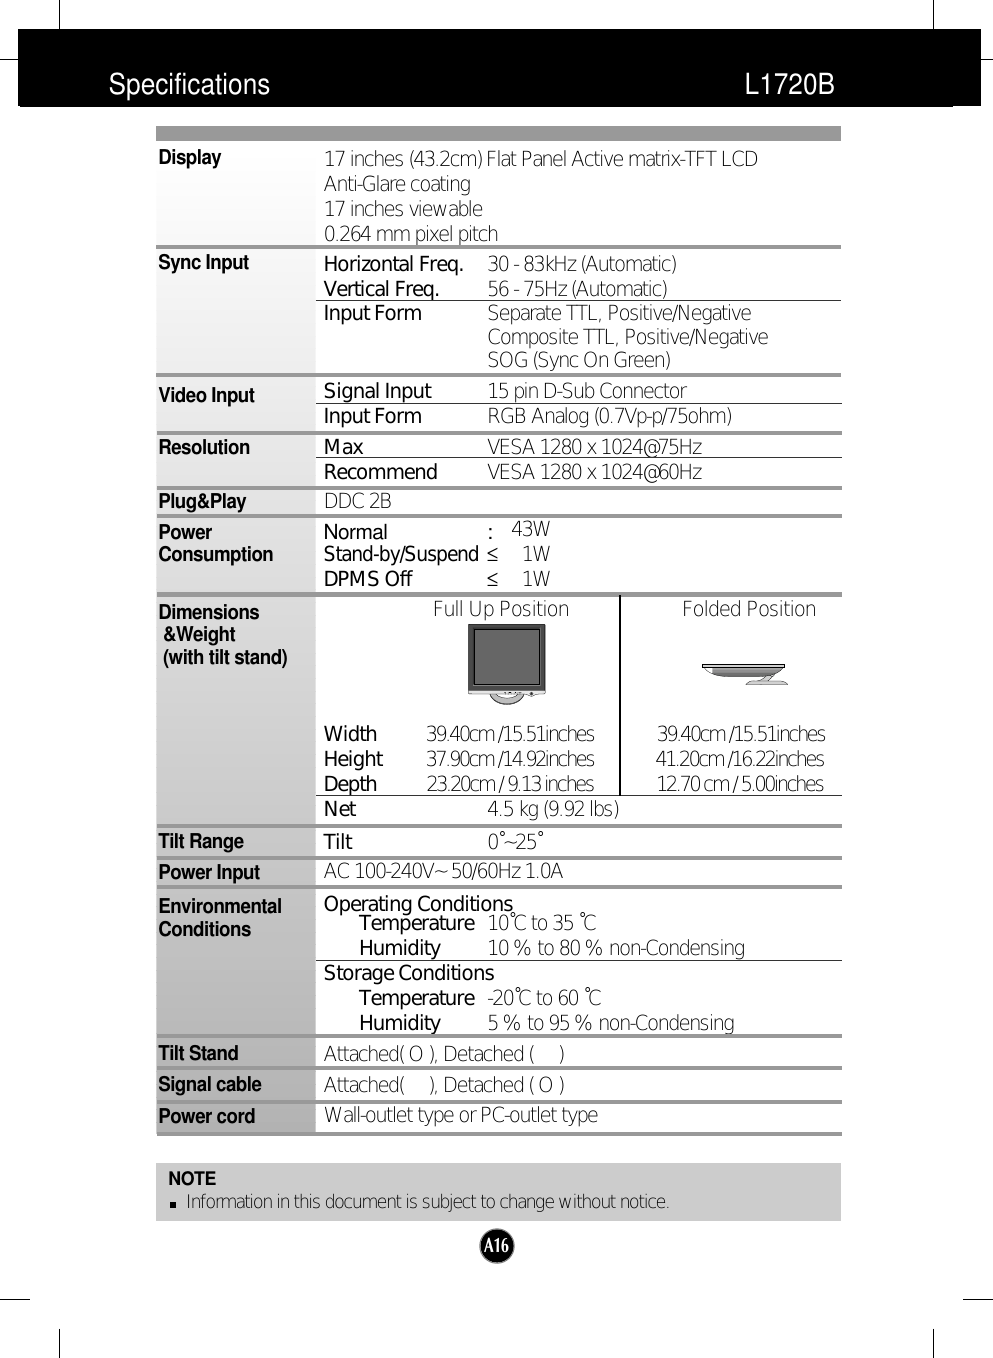 A16Specifications                                                                 L1720BNOTEInformation in this document is subject to change without notice.17 inches (43.2cm) Flat Panel Active matrix-TFT LCD Anti-Glare coating17 inches viewable0.264 mm pixel pitchHorizontal Freq. 30 - 83kHz (Automatic)Vertical Freq. 56 - 75Hz (Automatic)Input Form Separate TTL, Positive/NegativeComposite TTL, Positive/NegativeSOG (Sync On Green) Signal Input 15 pin D-Sub ConnectorInput Form RGB Analog (0.7Vp-p/75ohm)Max VESA 1280 x 1024@75Hz Recommend VESA 1280 x 1024@60HzDDC 2BNormal :43WStand-by/Suspend≤1WDPMS Off ≤1W Full Up Position                     Folded PositionWidth          39.40cm /15.51inches               39.40cm /15.51inchesHeight         37.90cm /14.92inches 41.20cm /16.22inchesDepth          23.20cm / 9.13 inches               12.70 cm / 5.00inchesNet 4.5 kg (9.92 lbs)Tilt 0˚~25˚AC 100-240V~ 50/60Hz 1.0AOperating ConditionsTemperature 10˚C to 35 ˚CHumidity 10 % to 80 % non-CondensingStorage ConditionsTemperature -20˚C to 60 ˚CHumidity 5 % to 95 % non-CondensingAttached( O ), Detached (     )Attached(     ), Detached ( O )Wall-outlet type or PC-outlet typeDisplaySync InputVideo InputResolutionPlug&amp;PlayPowerConsumptionDimensions&amp;Weight(with tilt stand)Tilt RangePower InputEnvironmentalConditionsTilt StandSignal cablePower cord 